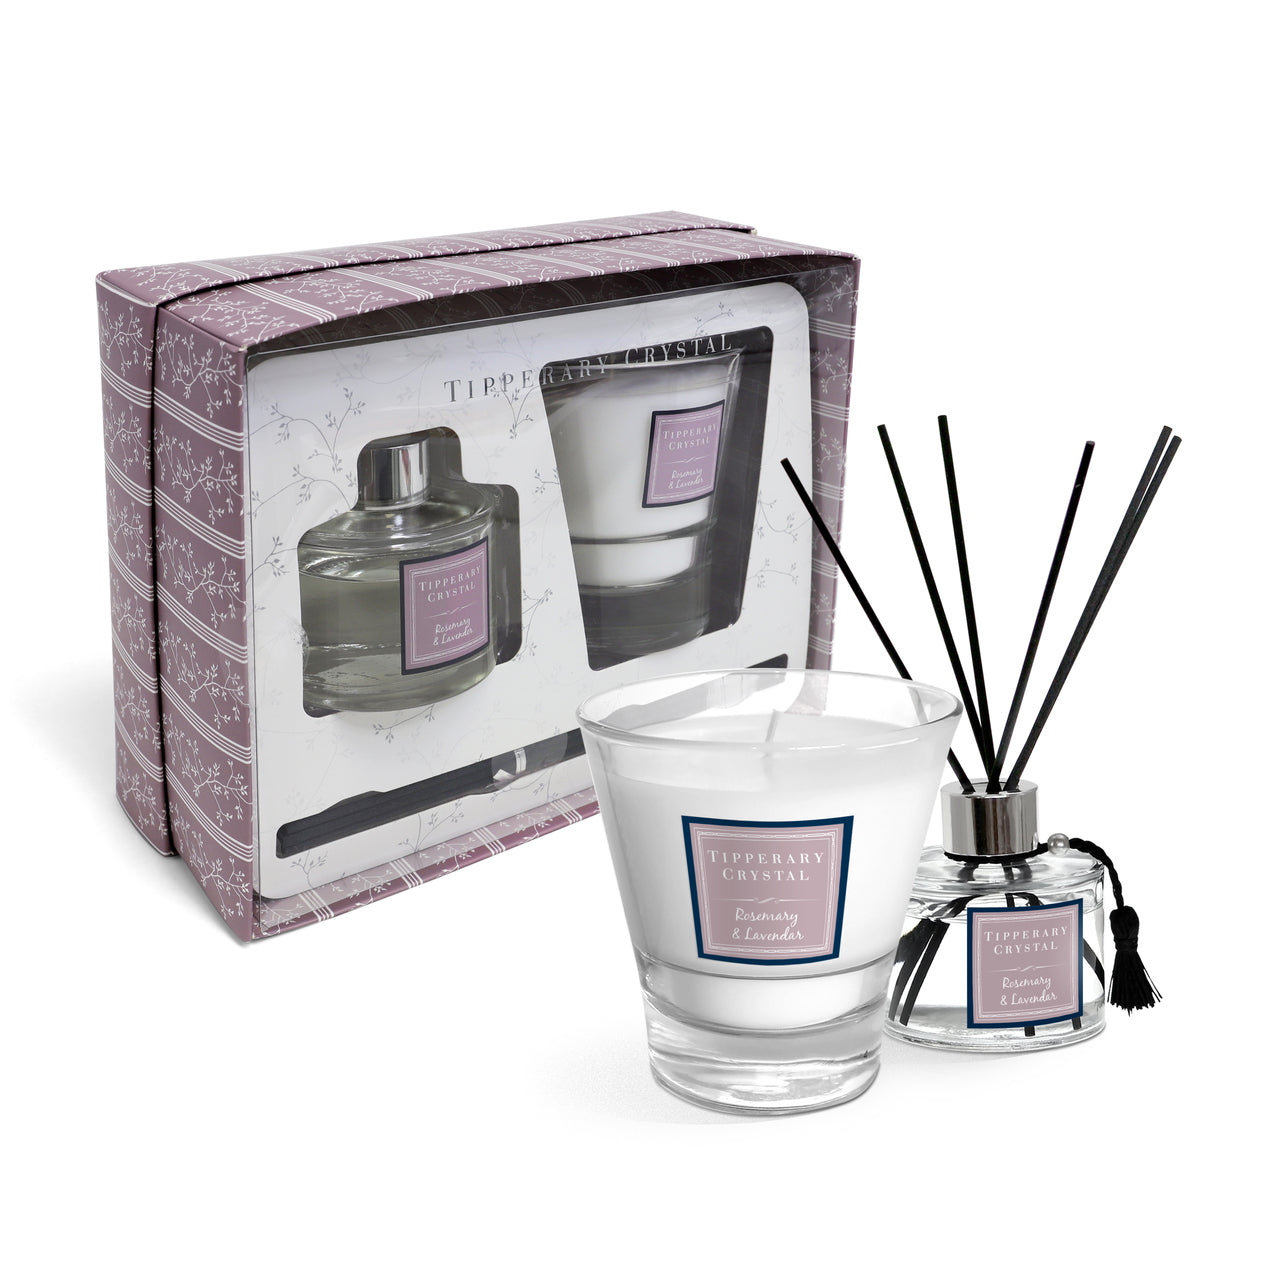 Tipperary Crystal Rosemary & Lavender Candle & Diffuser Gift Set NEW 2021